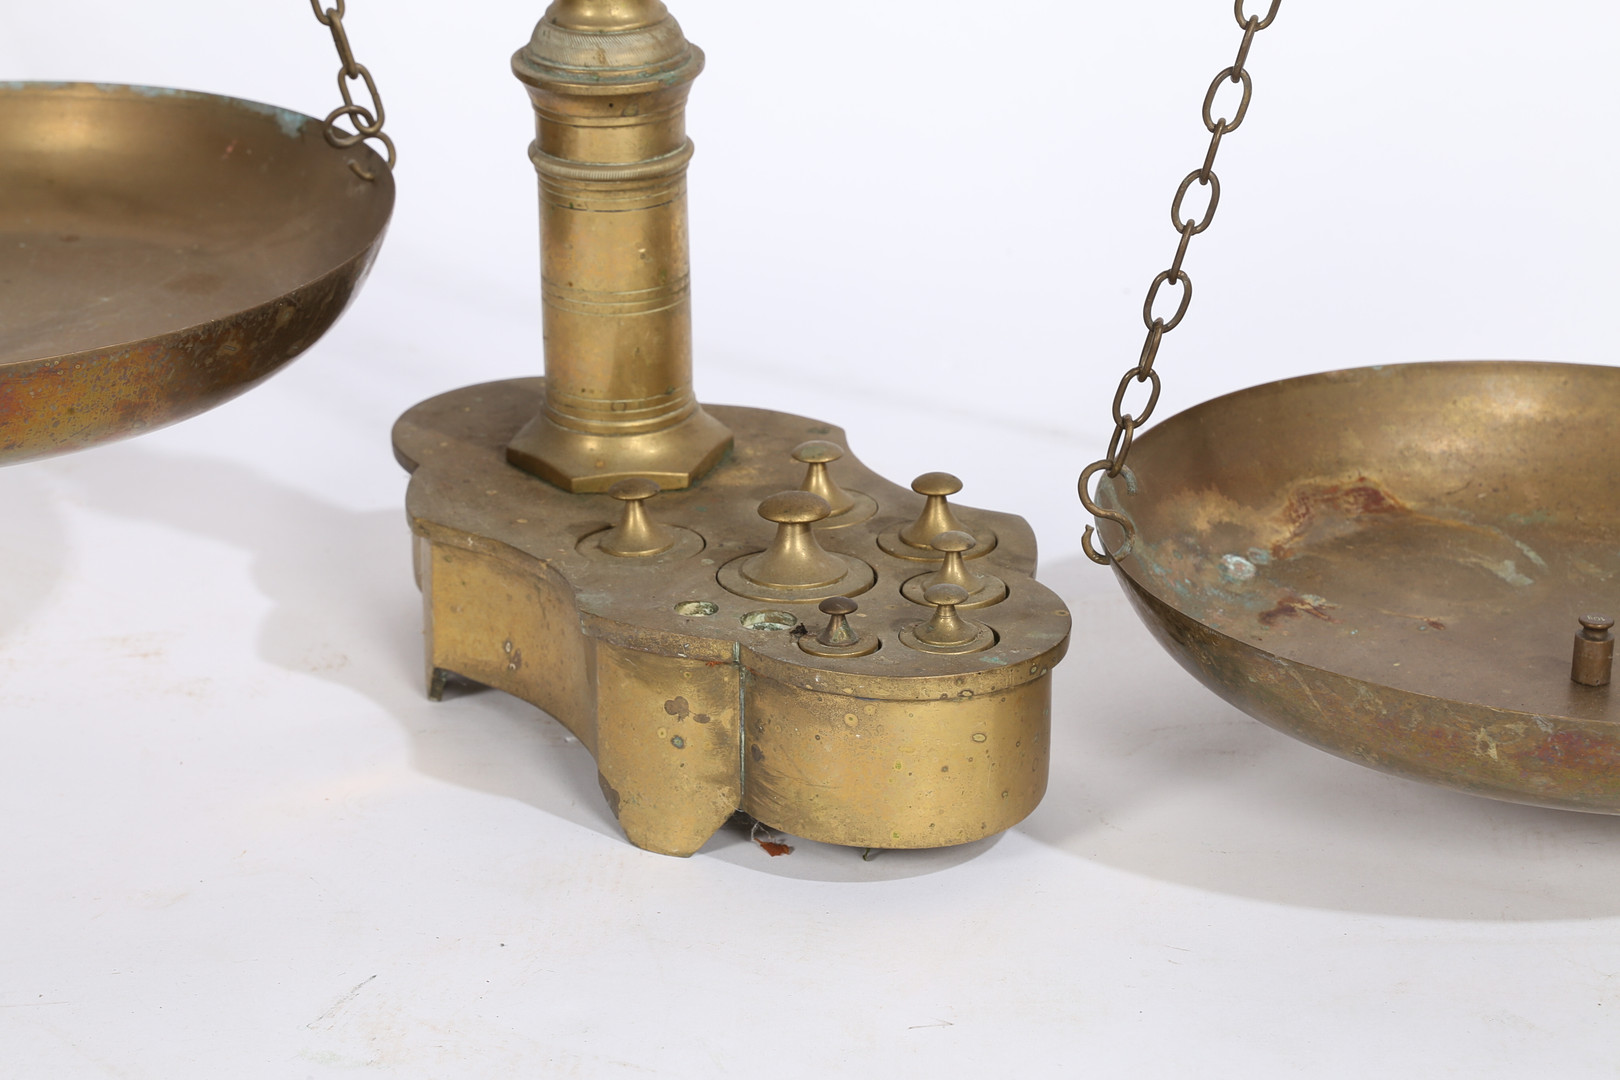 A LARGE PAIR OF 19TH/20TH CENTURY BRASS SCALES. - Image 4 of 12